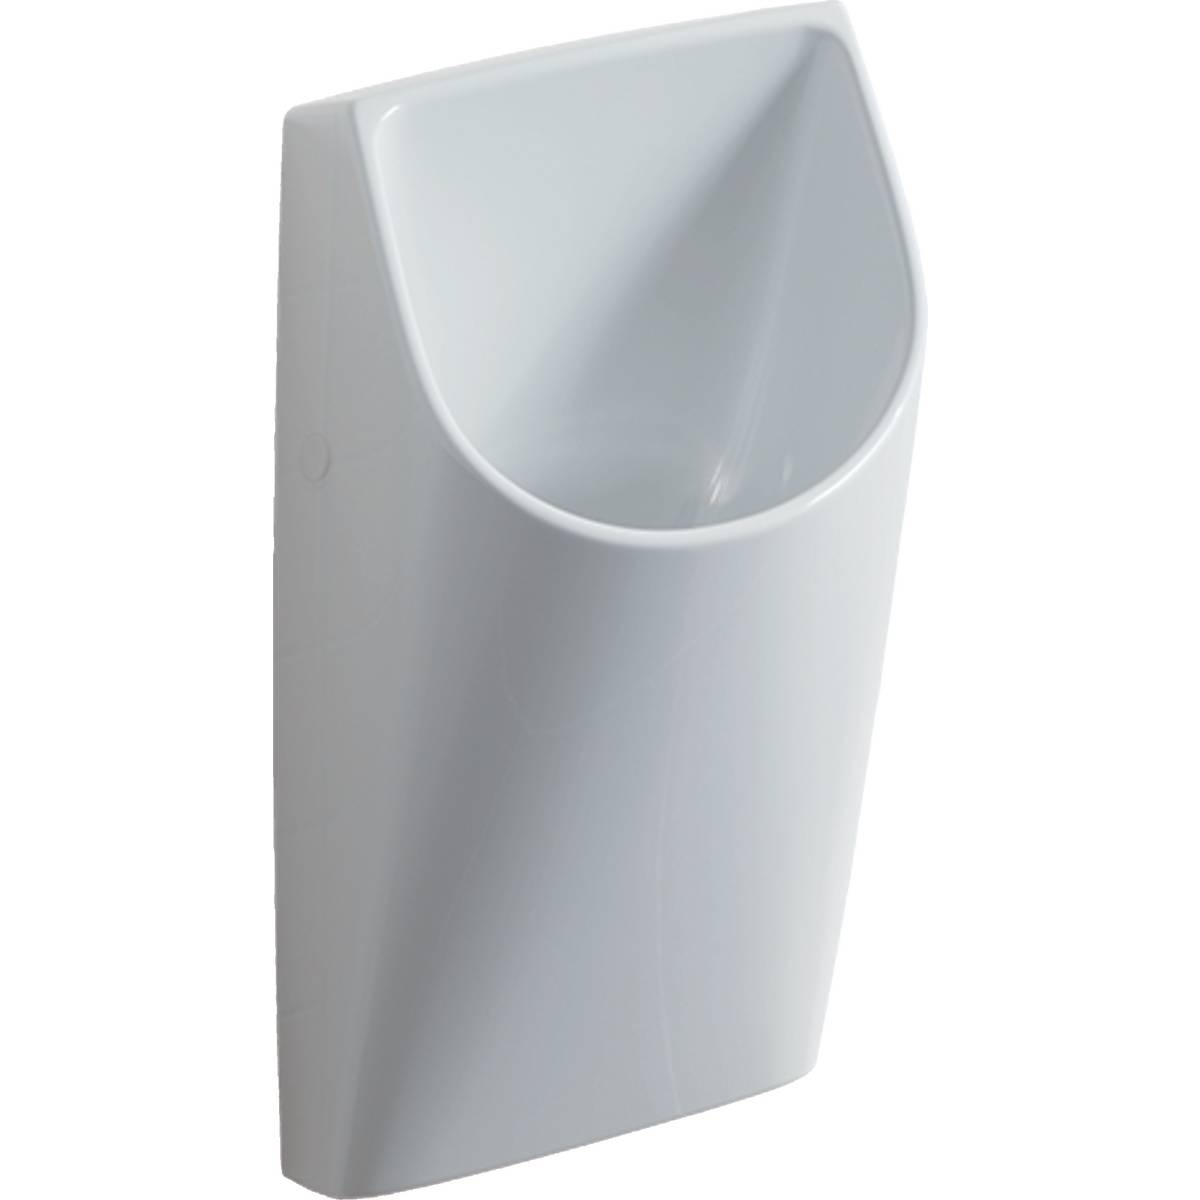 Smyle urinal, waterless, outlet to the rear